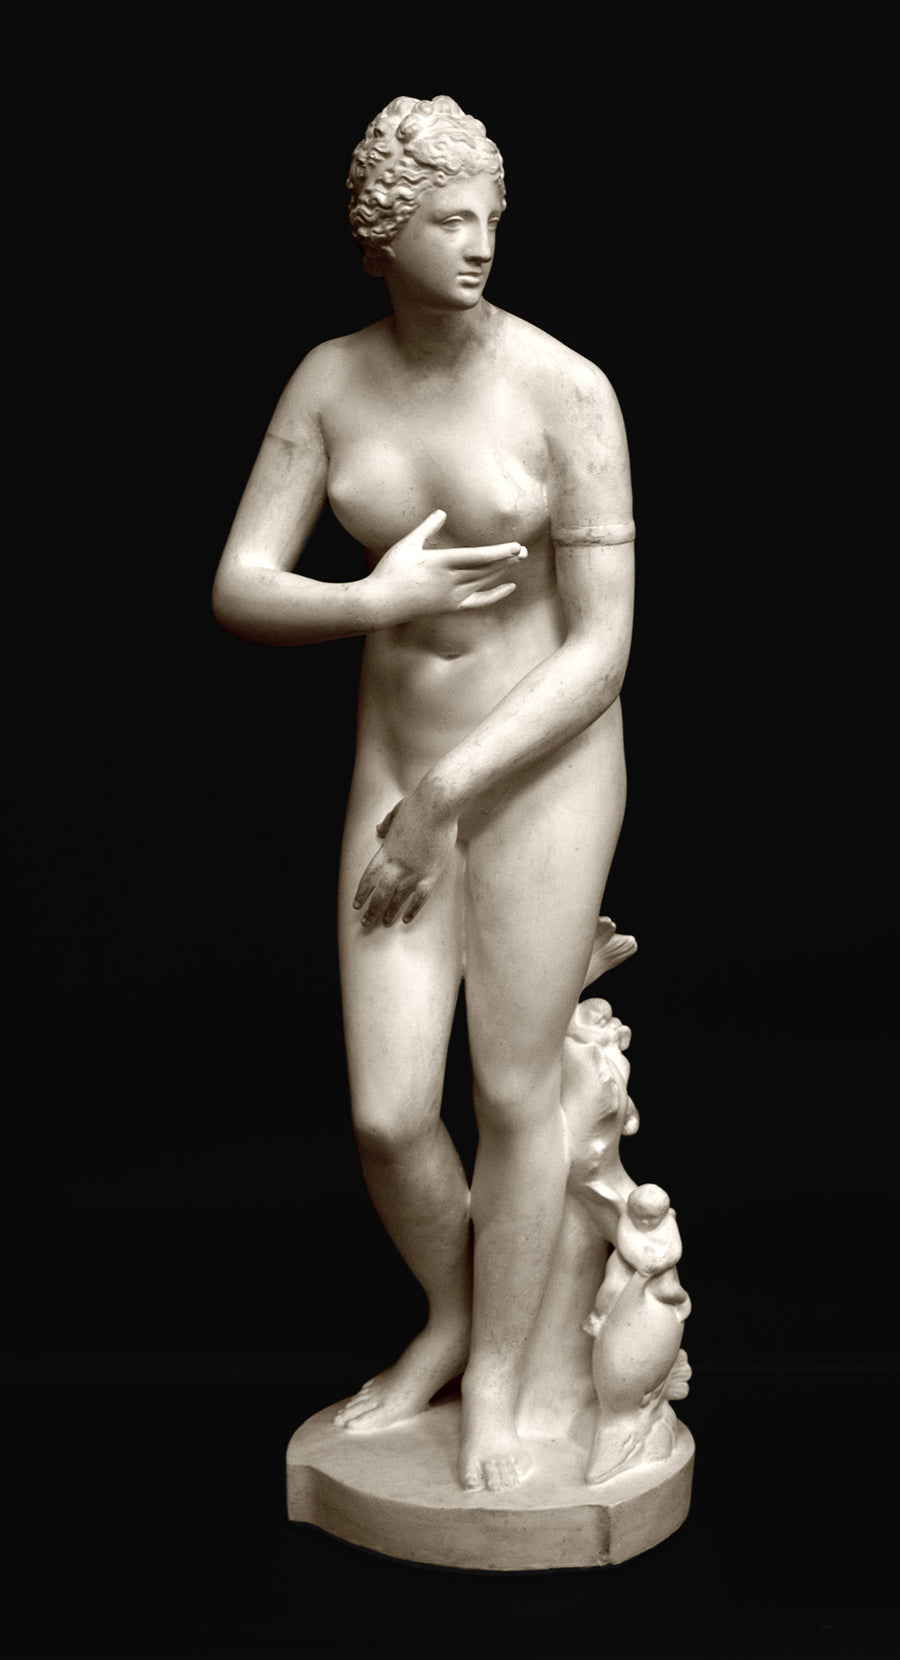 photo of plaster cast sculpture of Venus standing nude with two putti riding a dolphin at her feet